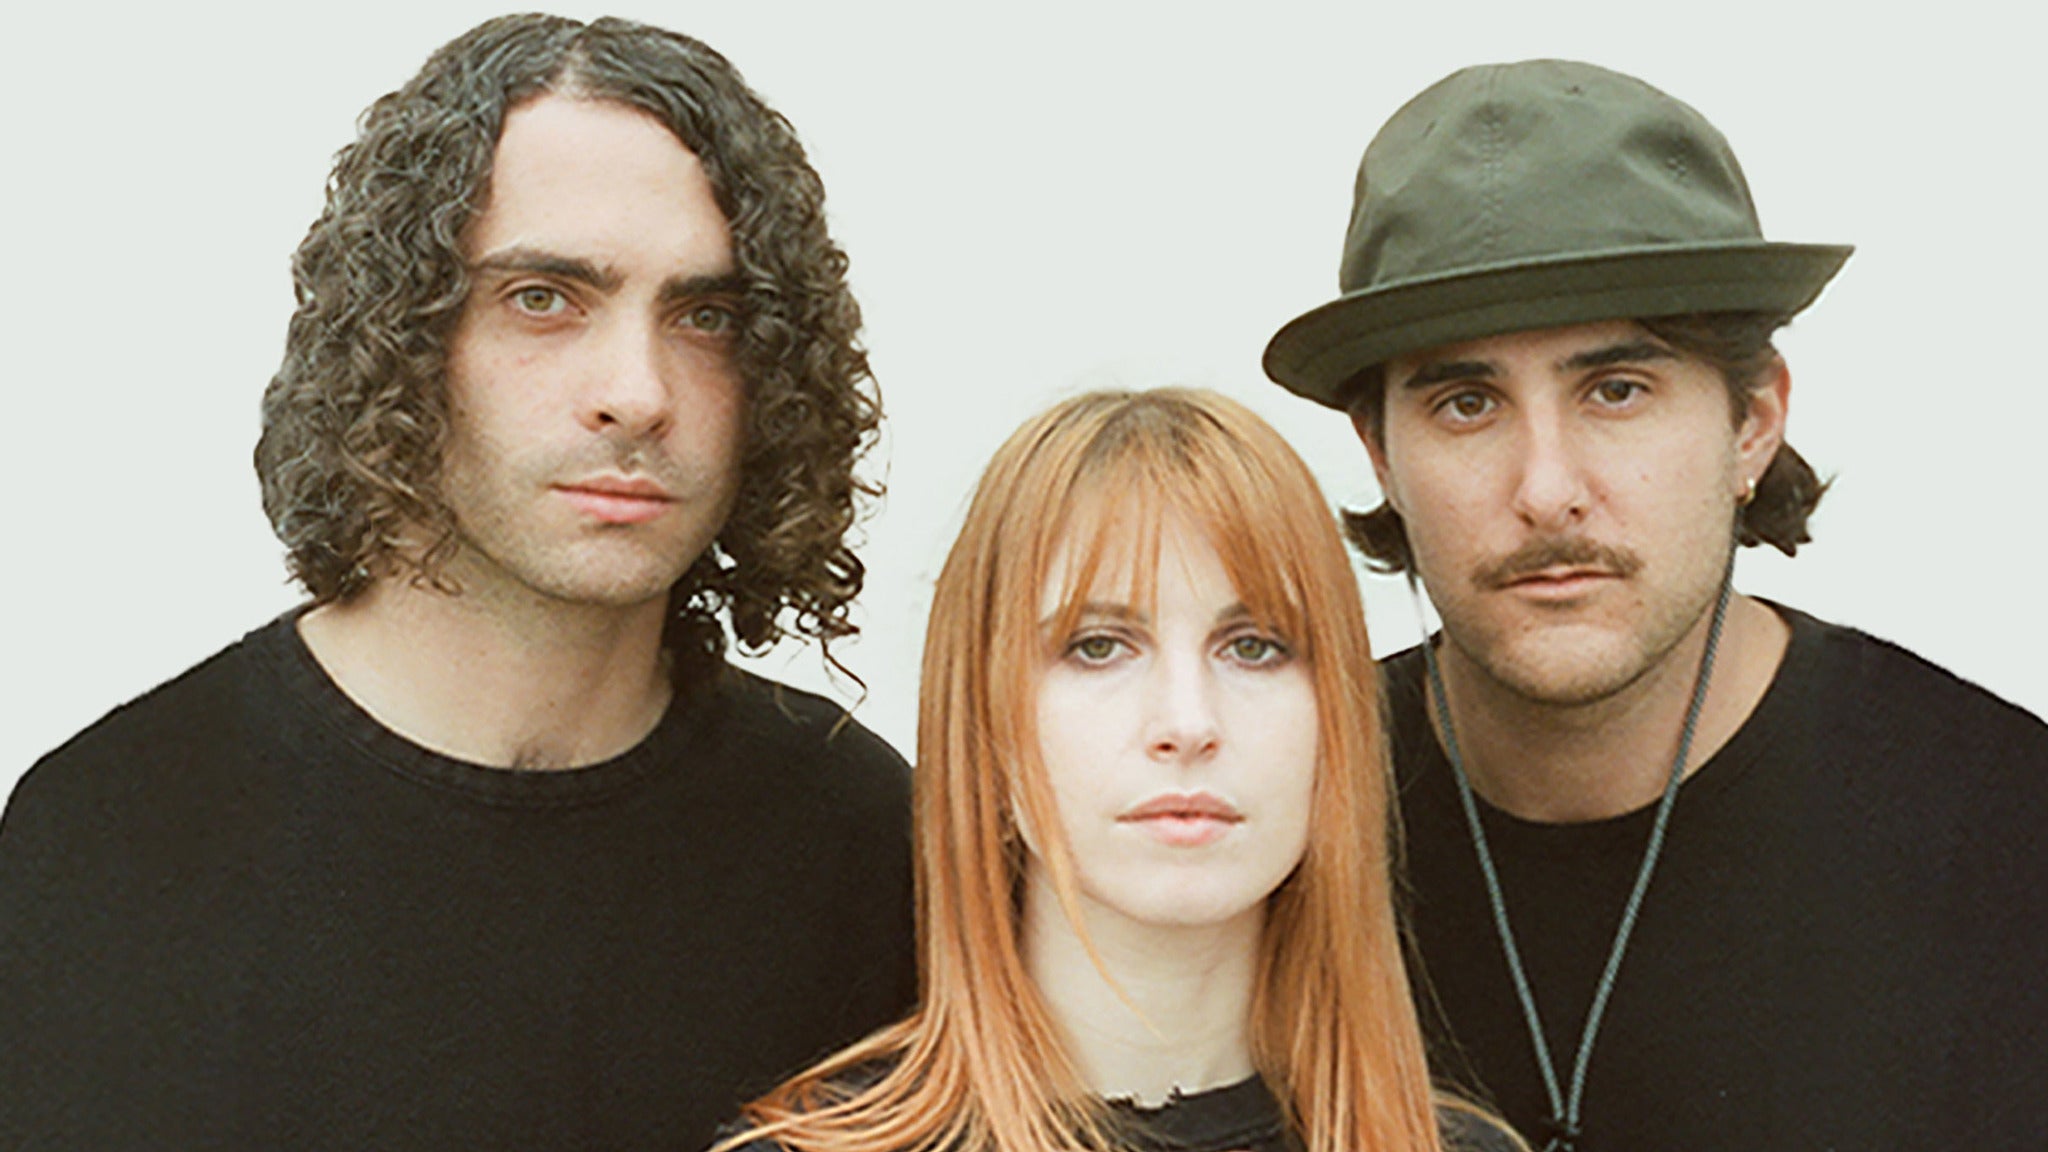 Image used with permission from Ticketmaster | Paramore tickets